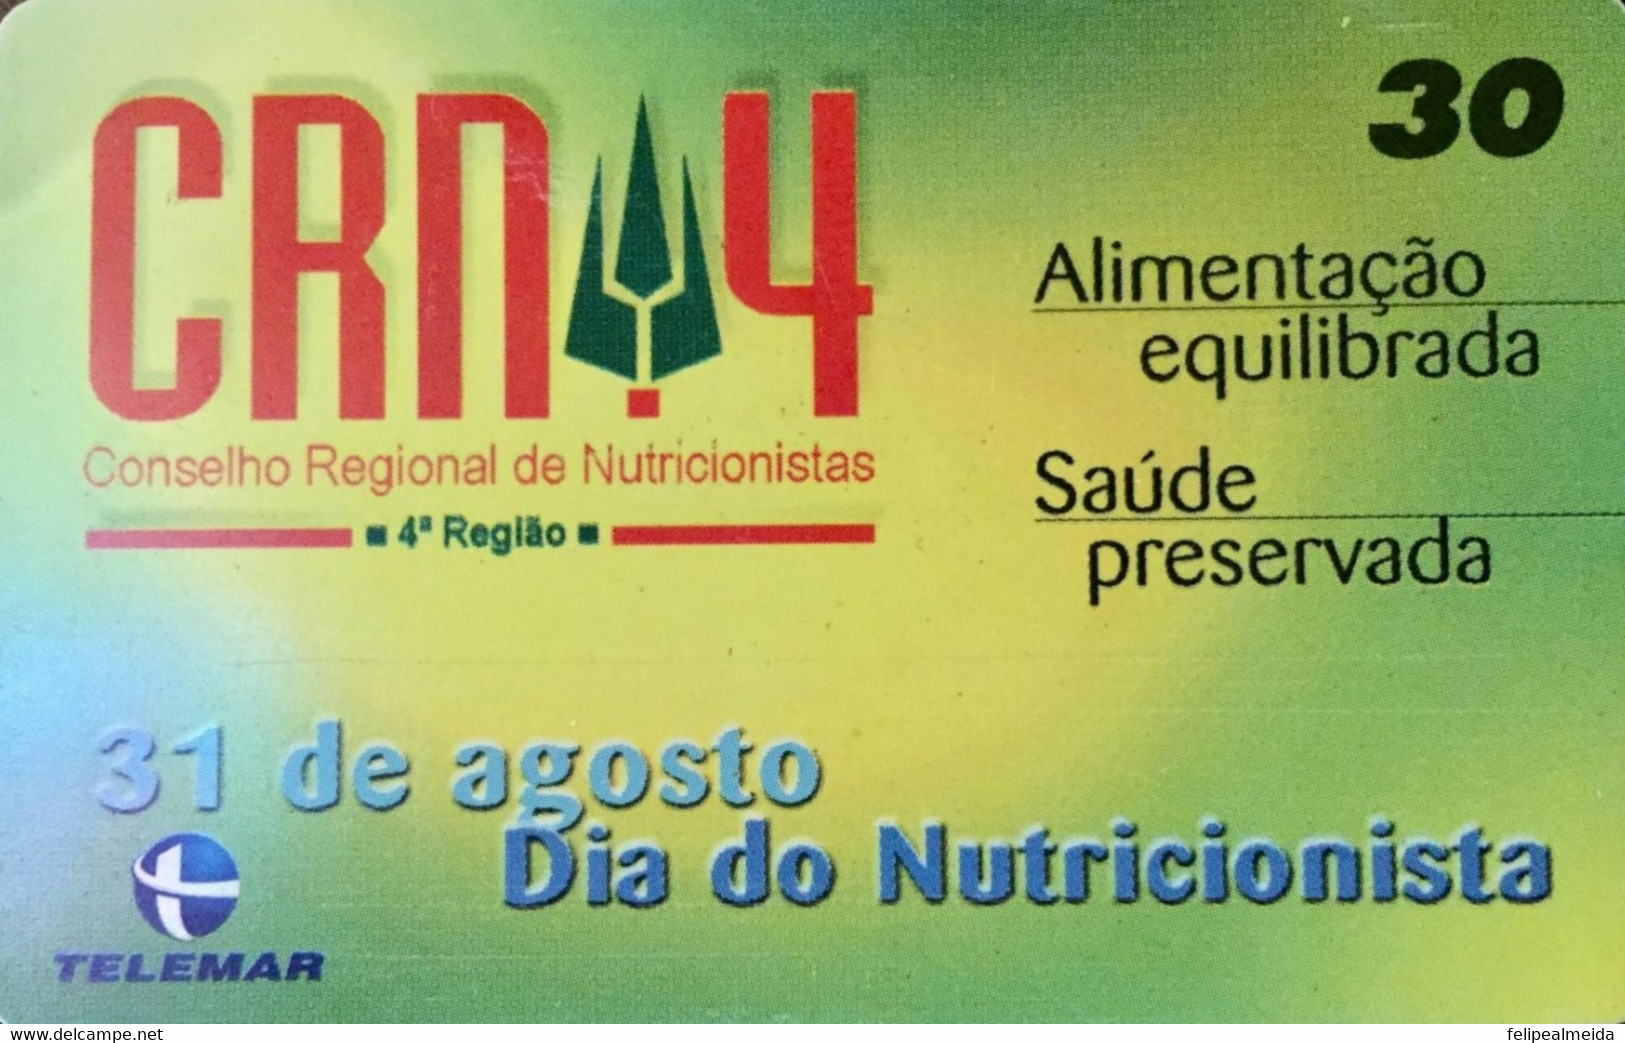 Phone Card Manufactured By Telemar In 1999 - Homage To The Nutritionist Day Celebrated On 31 August - Alimentación